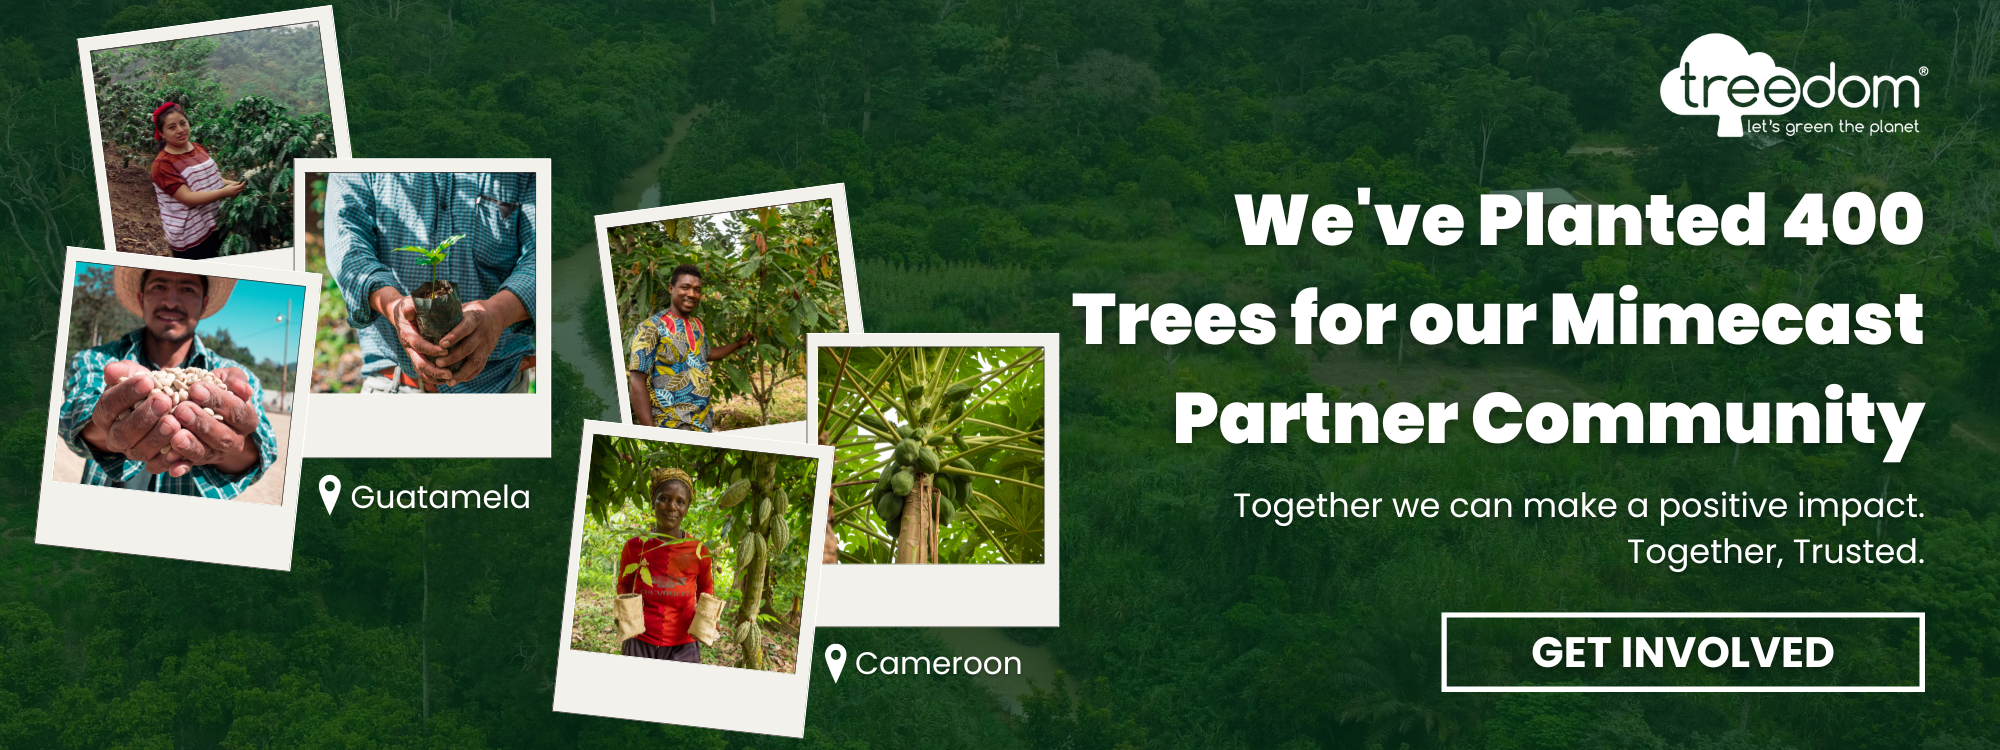 We've Planted 400 Trees for our Mimecast Partner Community. Together we can make a positive impact. Together, Trusted. Get Involved.